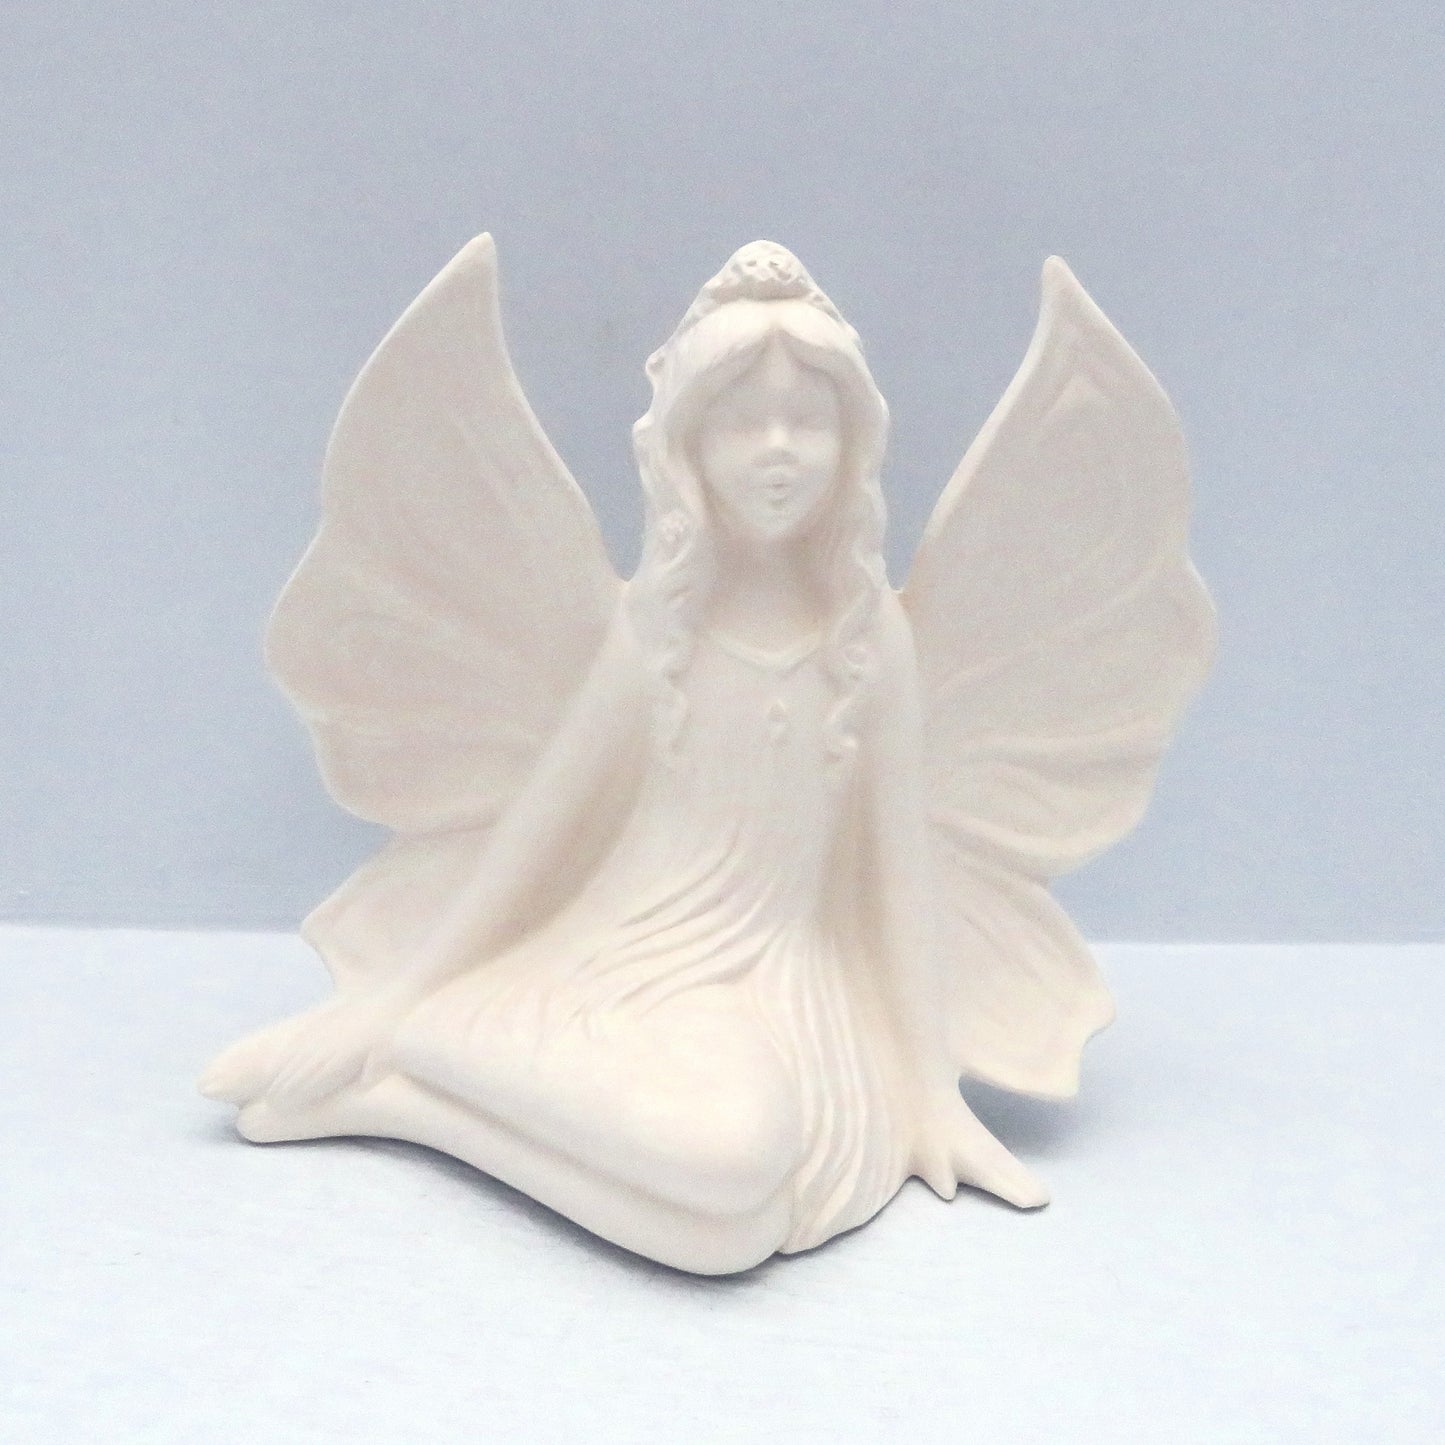 Handmade paintabla ceramic side sitting fairy sitting with her wings out facing the camera againsta a blue surface.